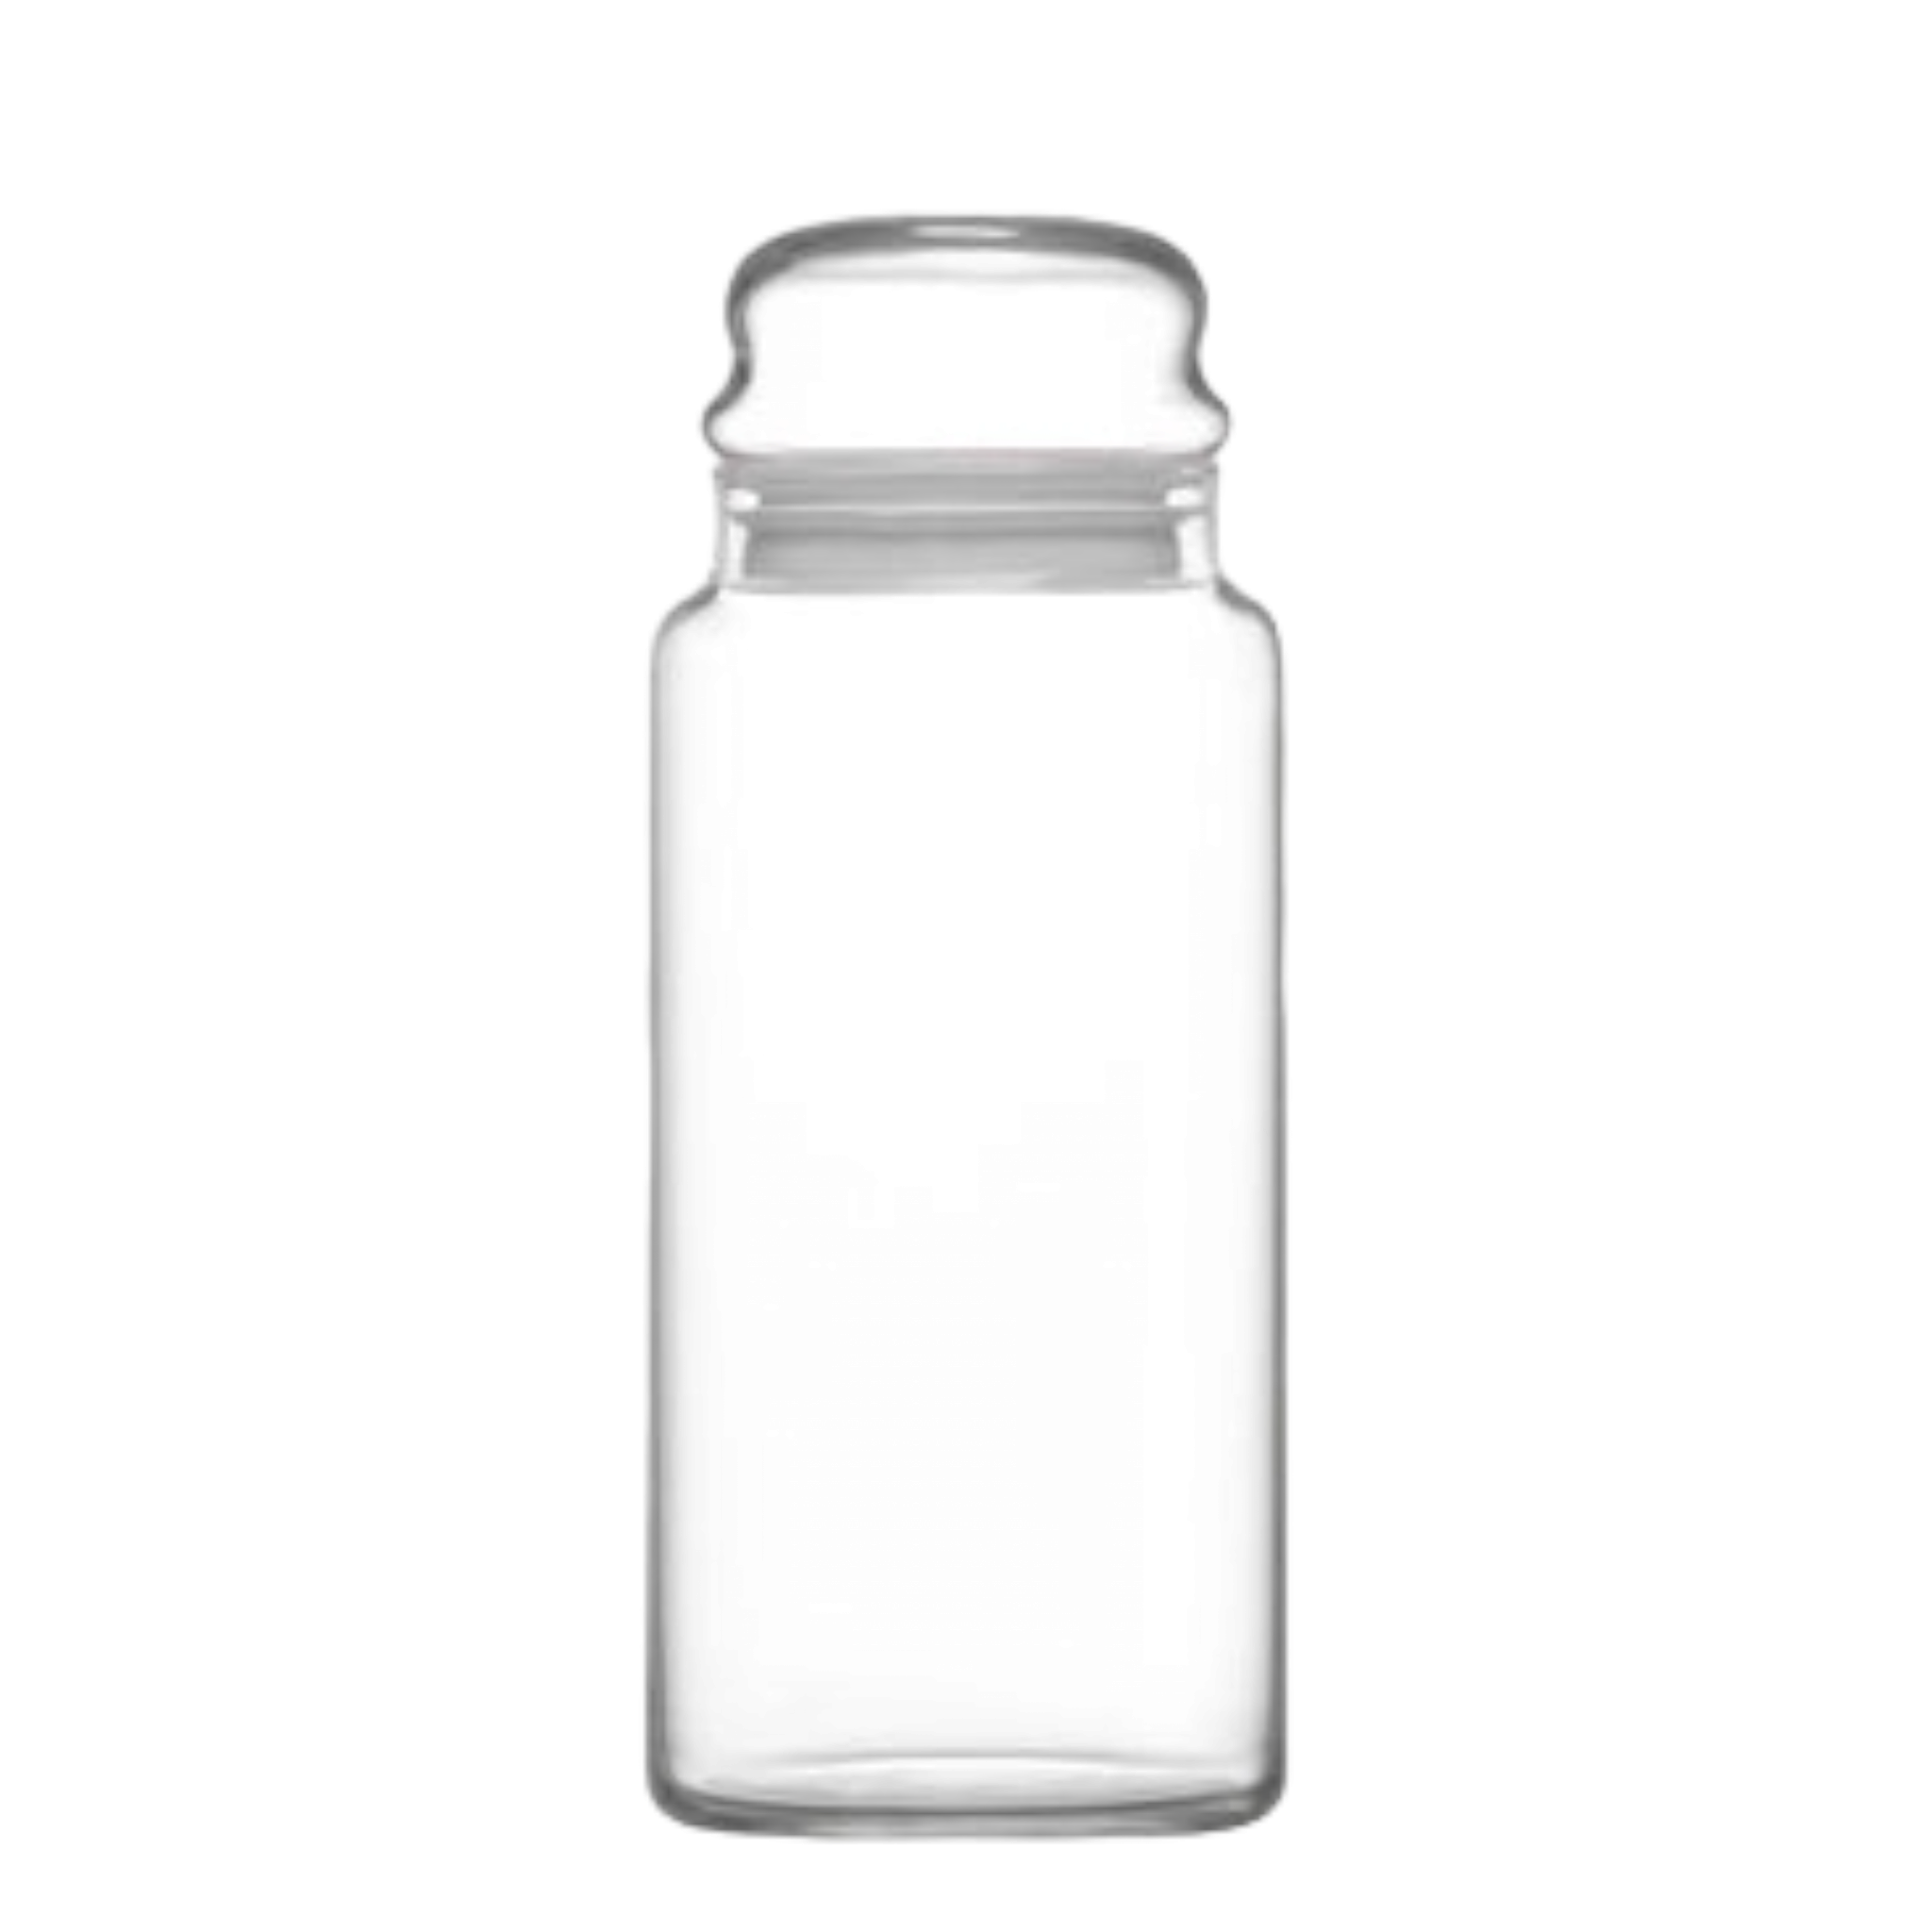 LAV Glass Canister Jar 890ml with White Lid SGN947